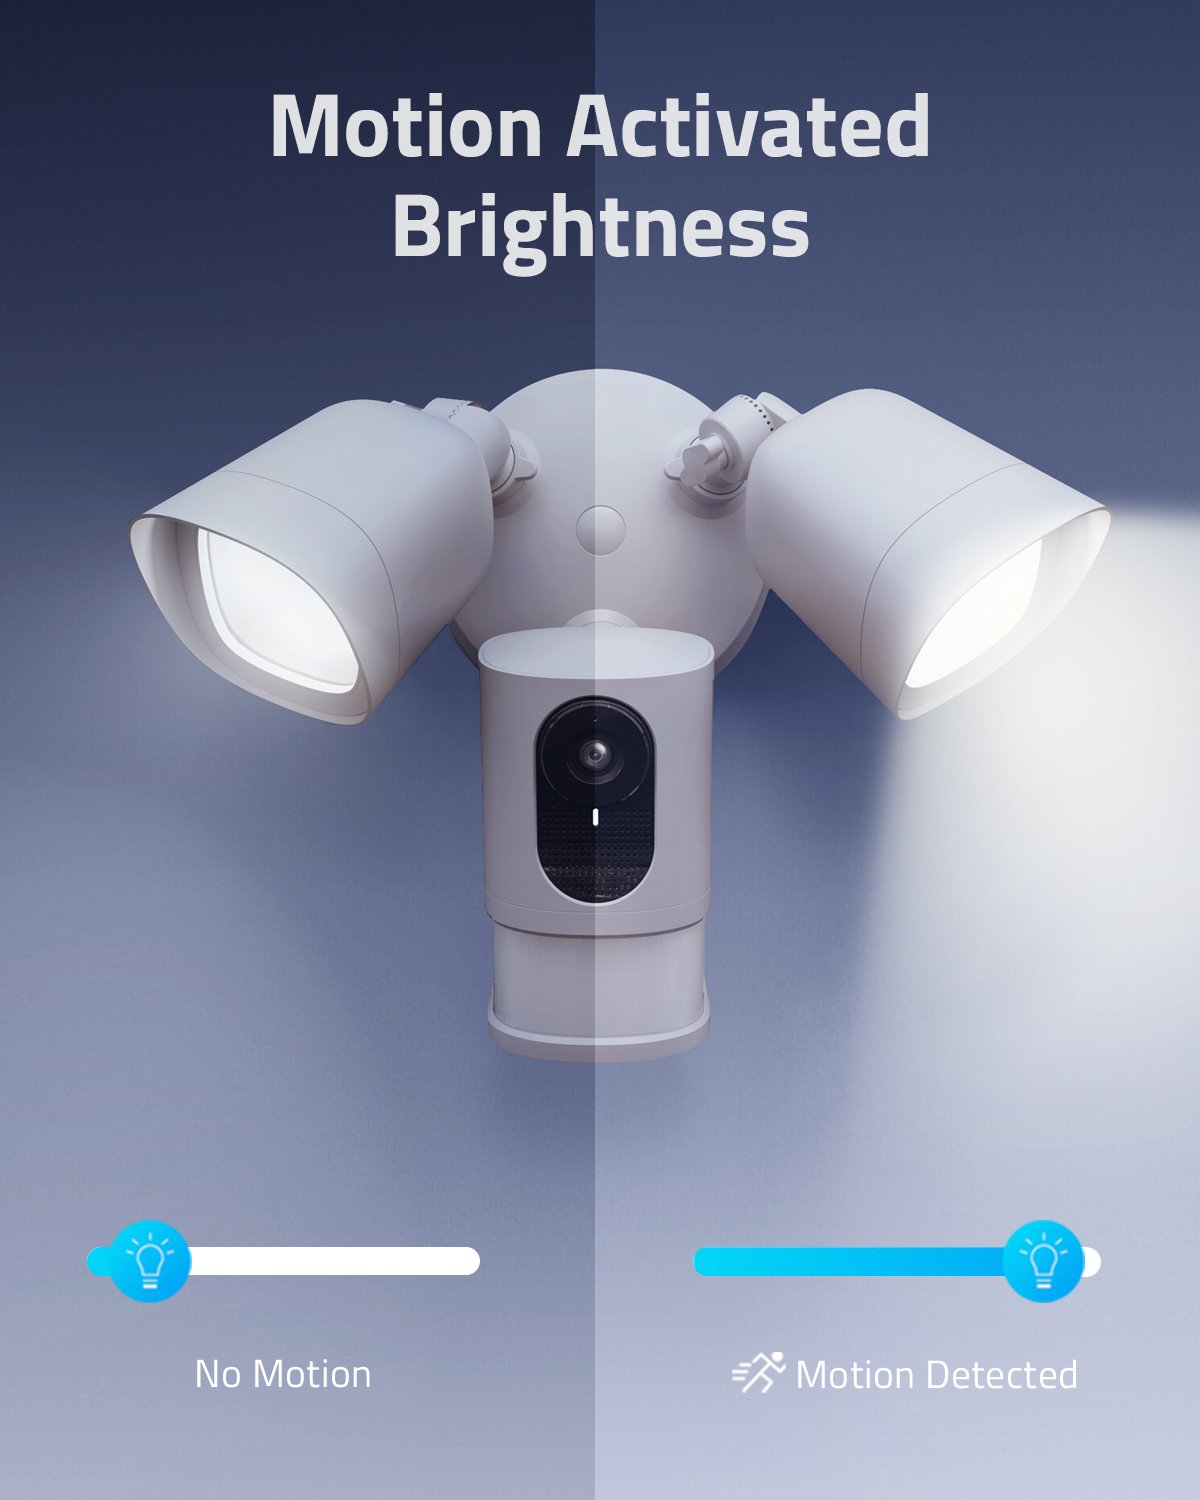 a eufy 2k floodlight camera shown with both the low light no motion lighting and the high lighting motion detected settings.  the caption reads, motion activated brightness